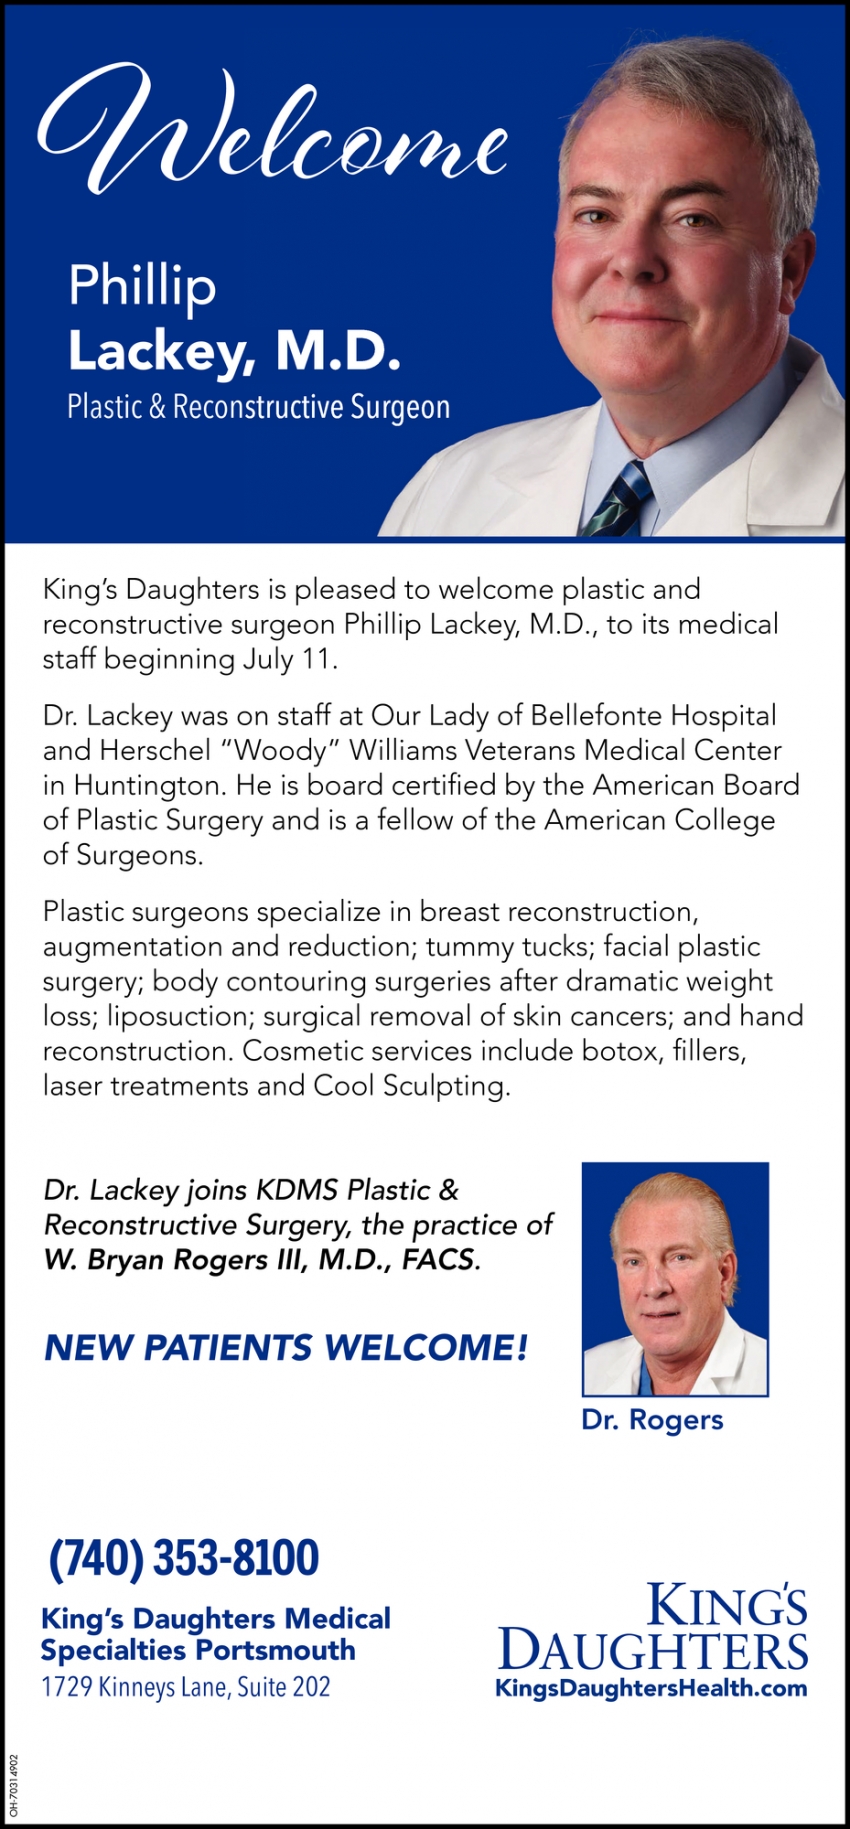 Welcome Phillip Lackey, M.D.